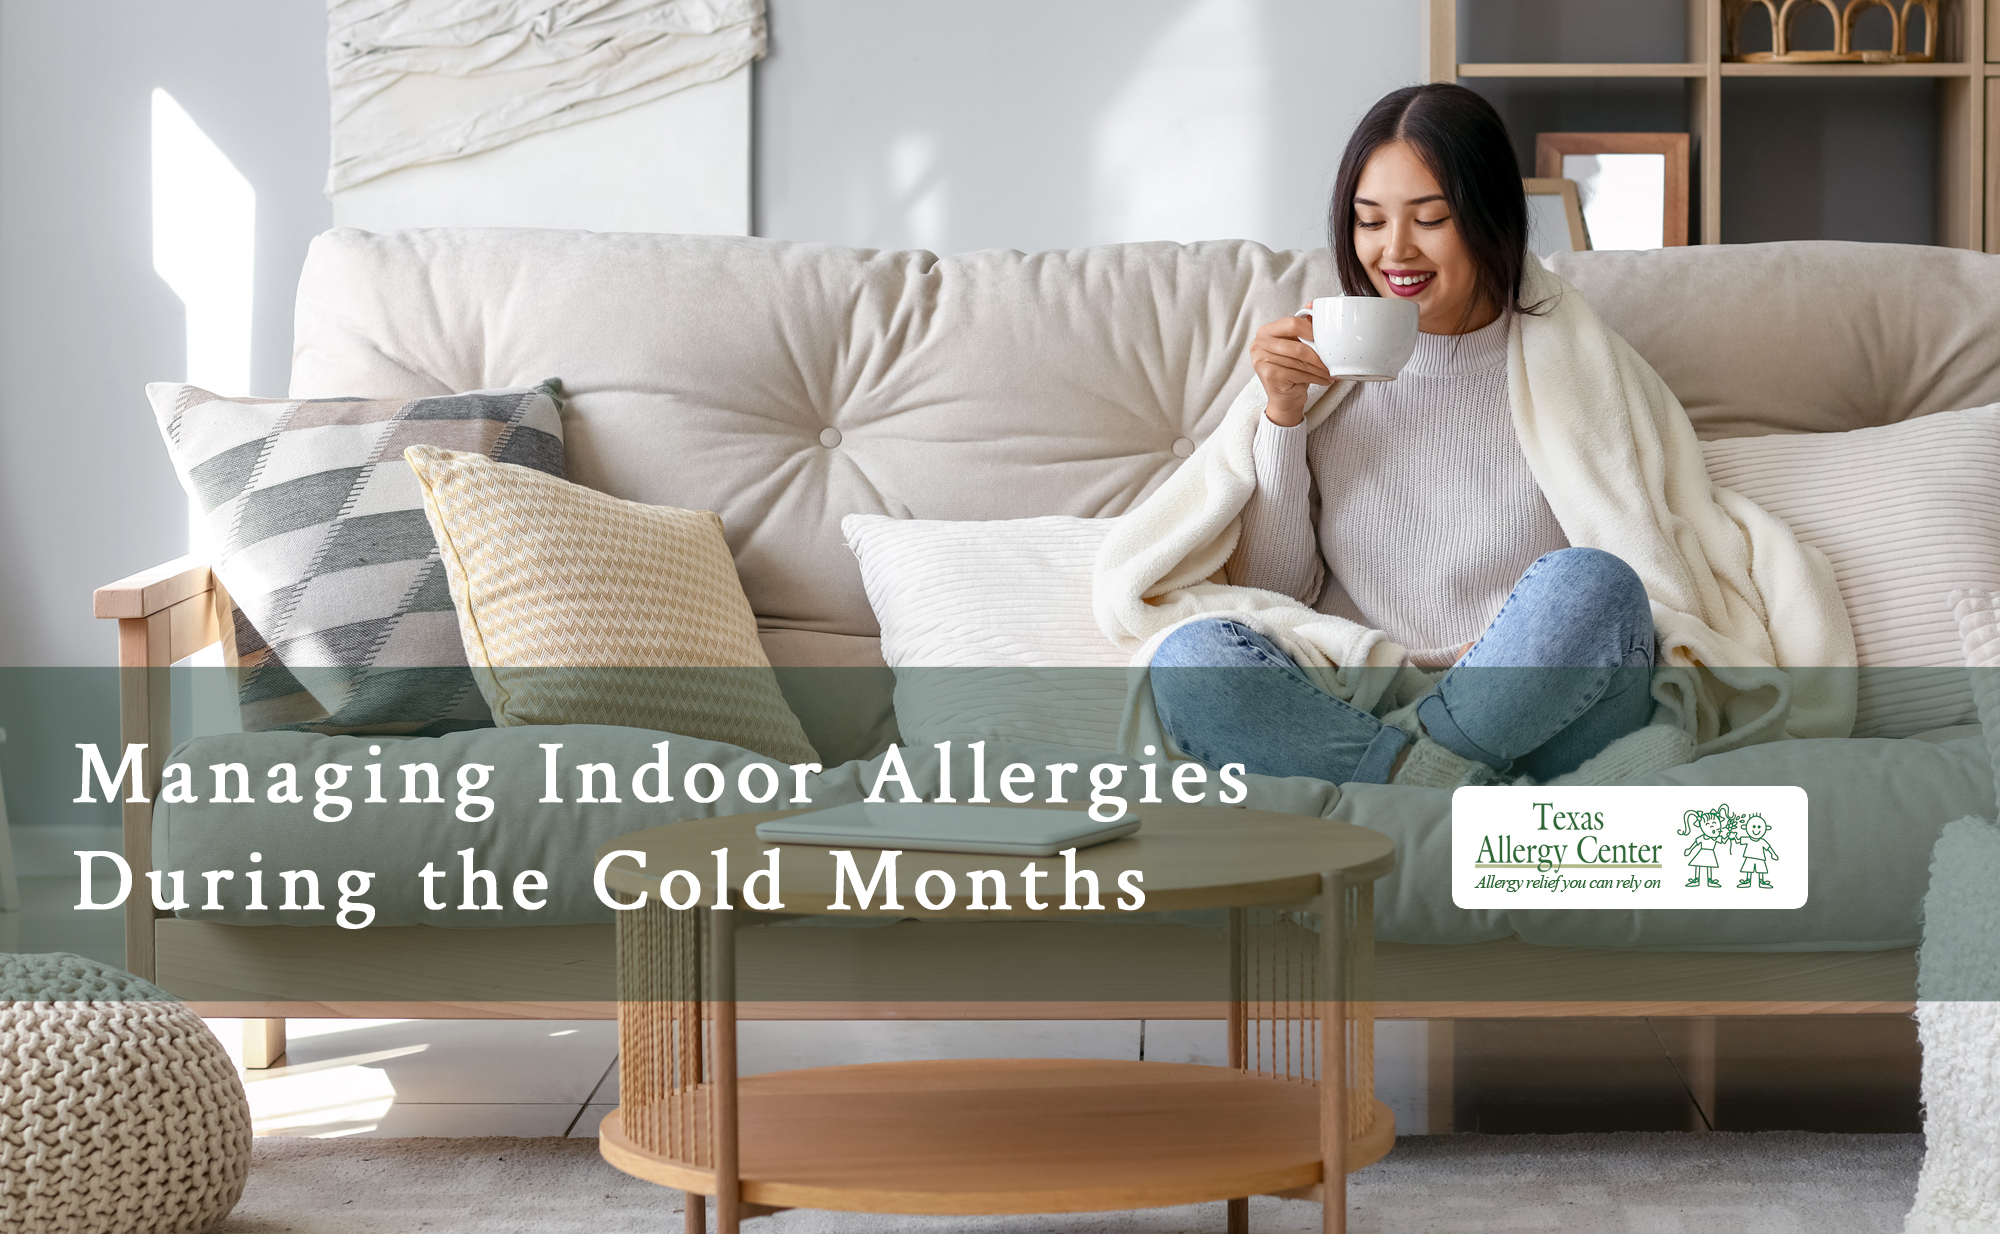 Managing Indoor Allergies During the Cold Months